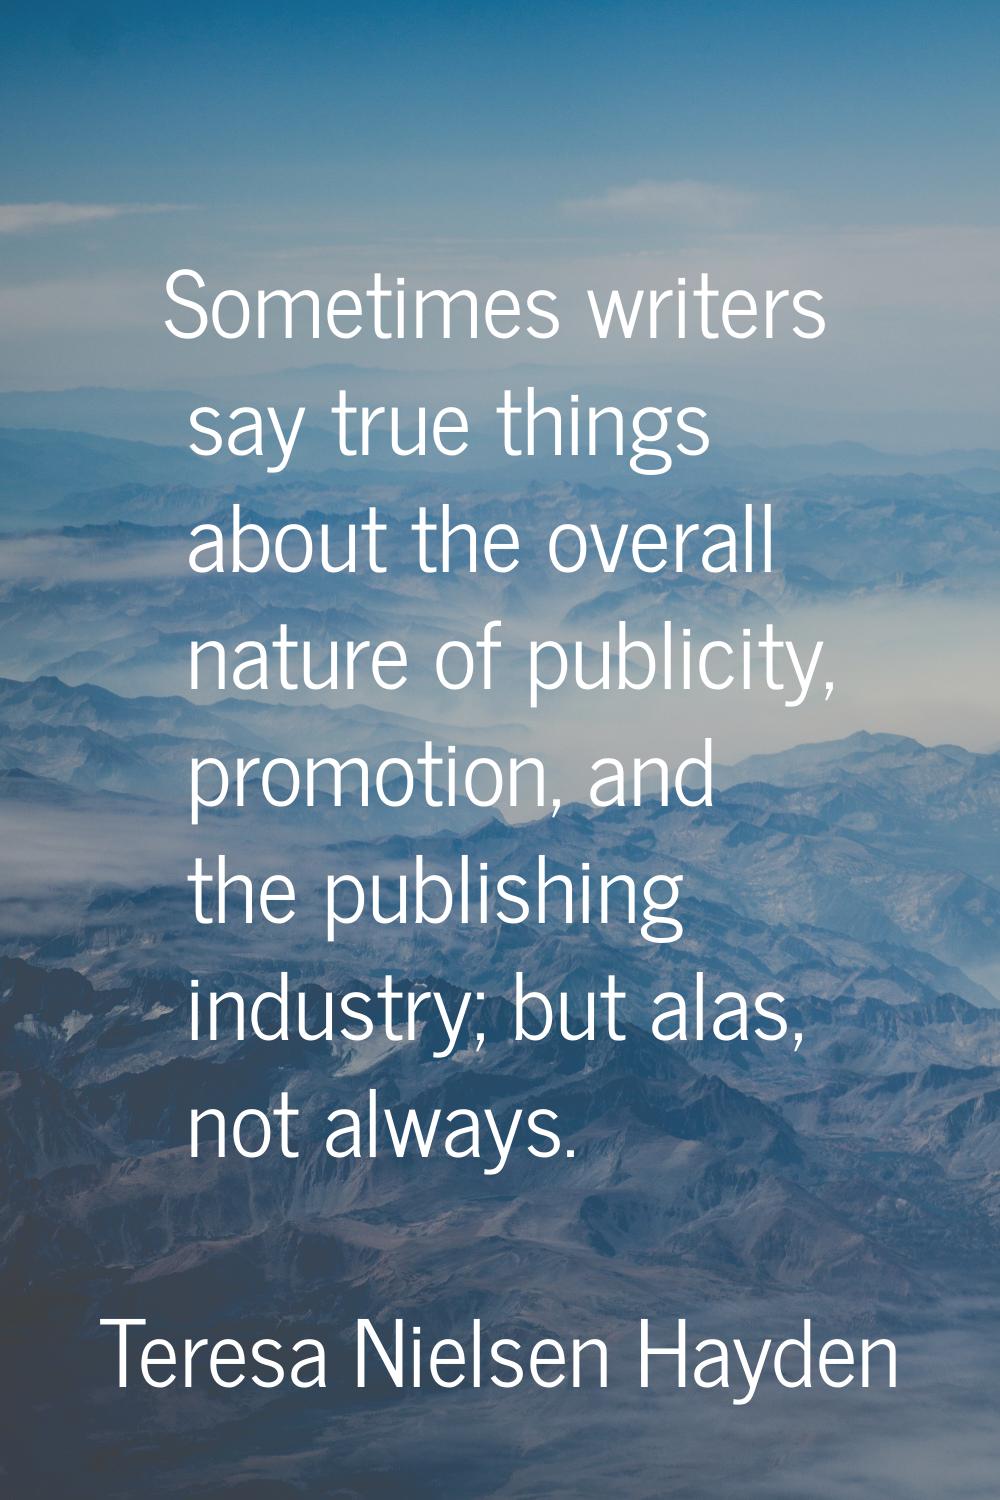 Sometimes writers say true things about the overall nature of publicity, promotion, and the publish